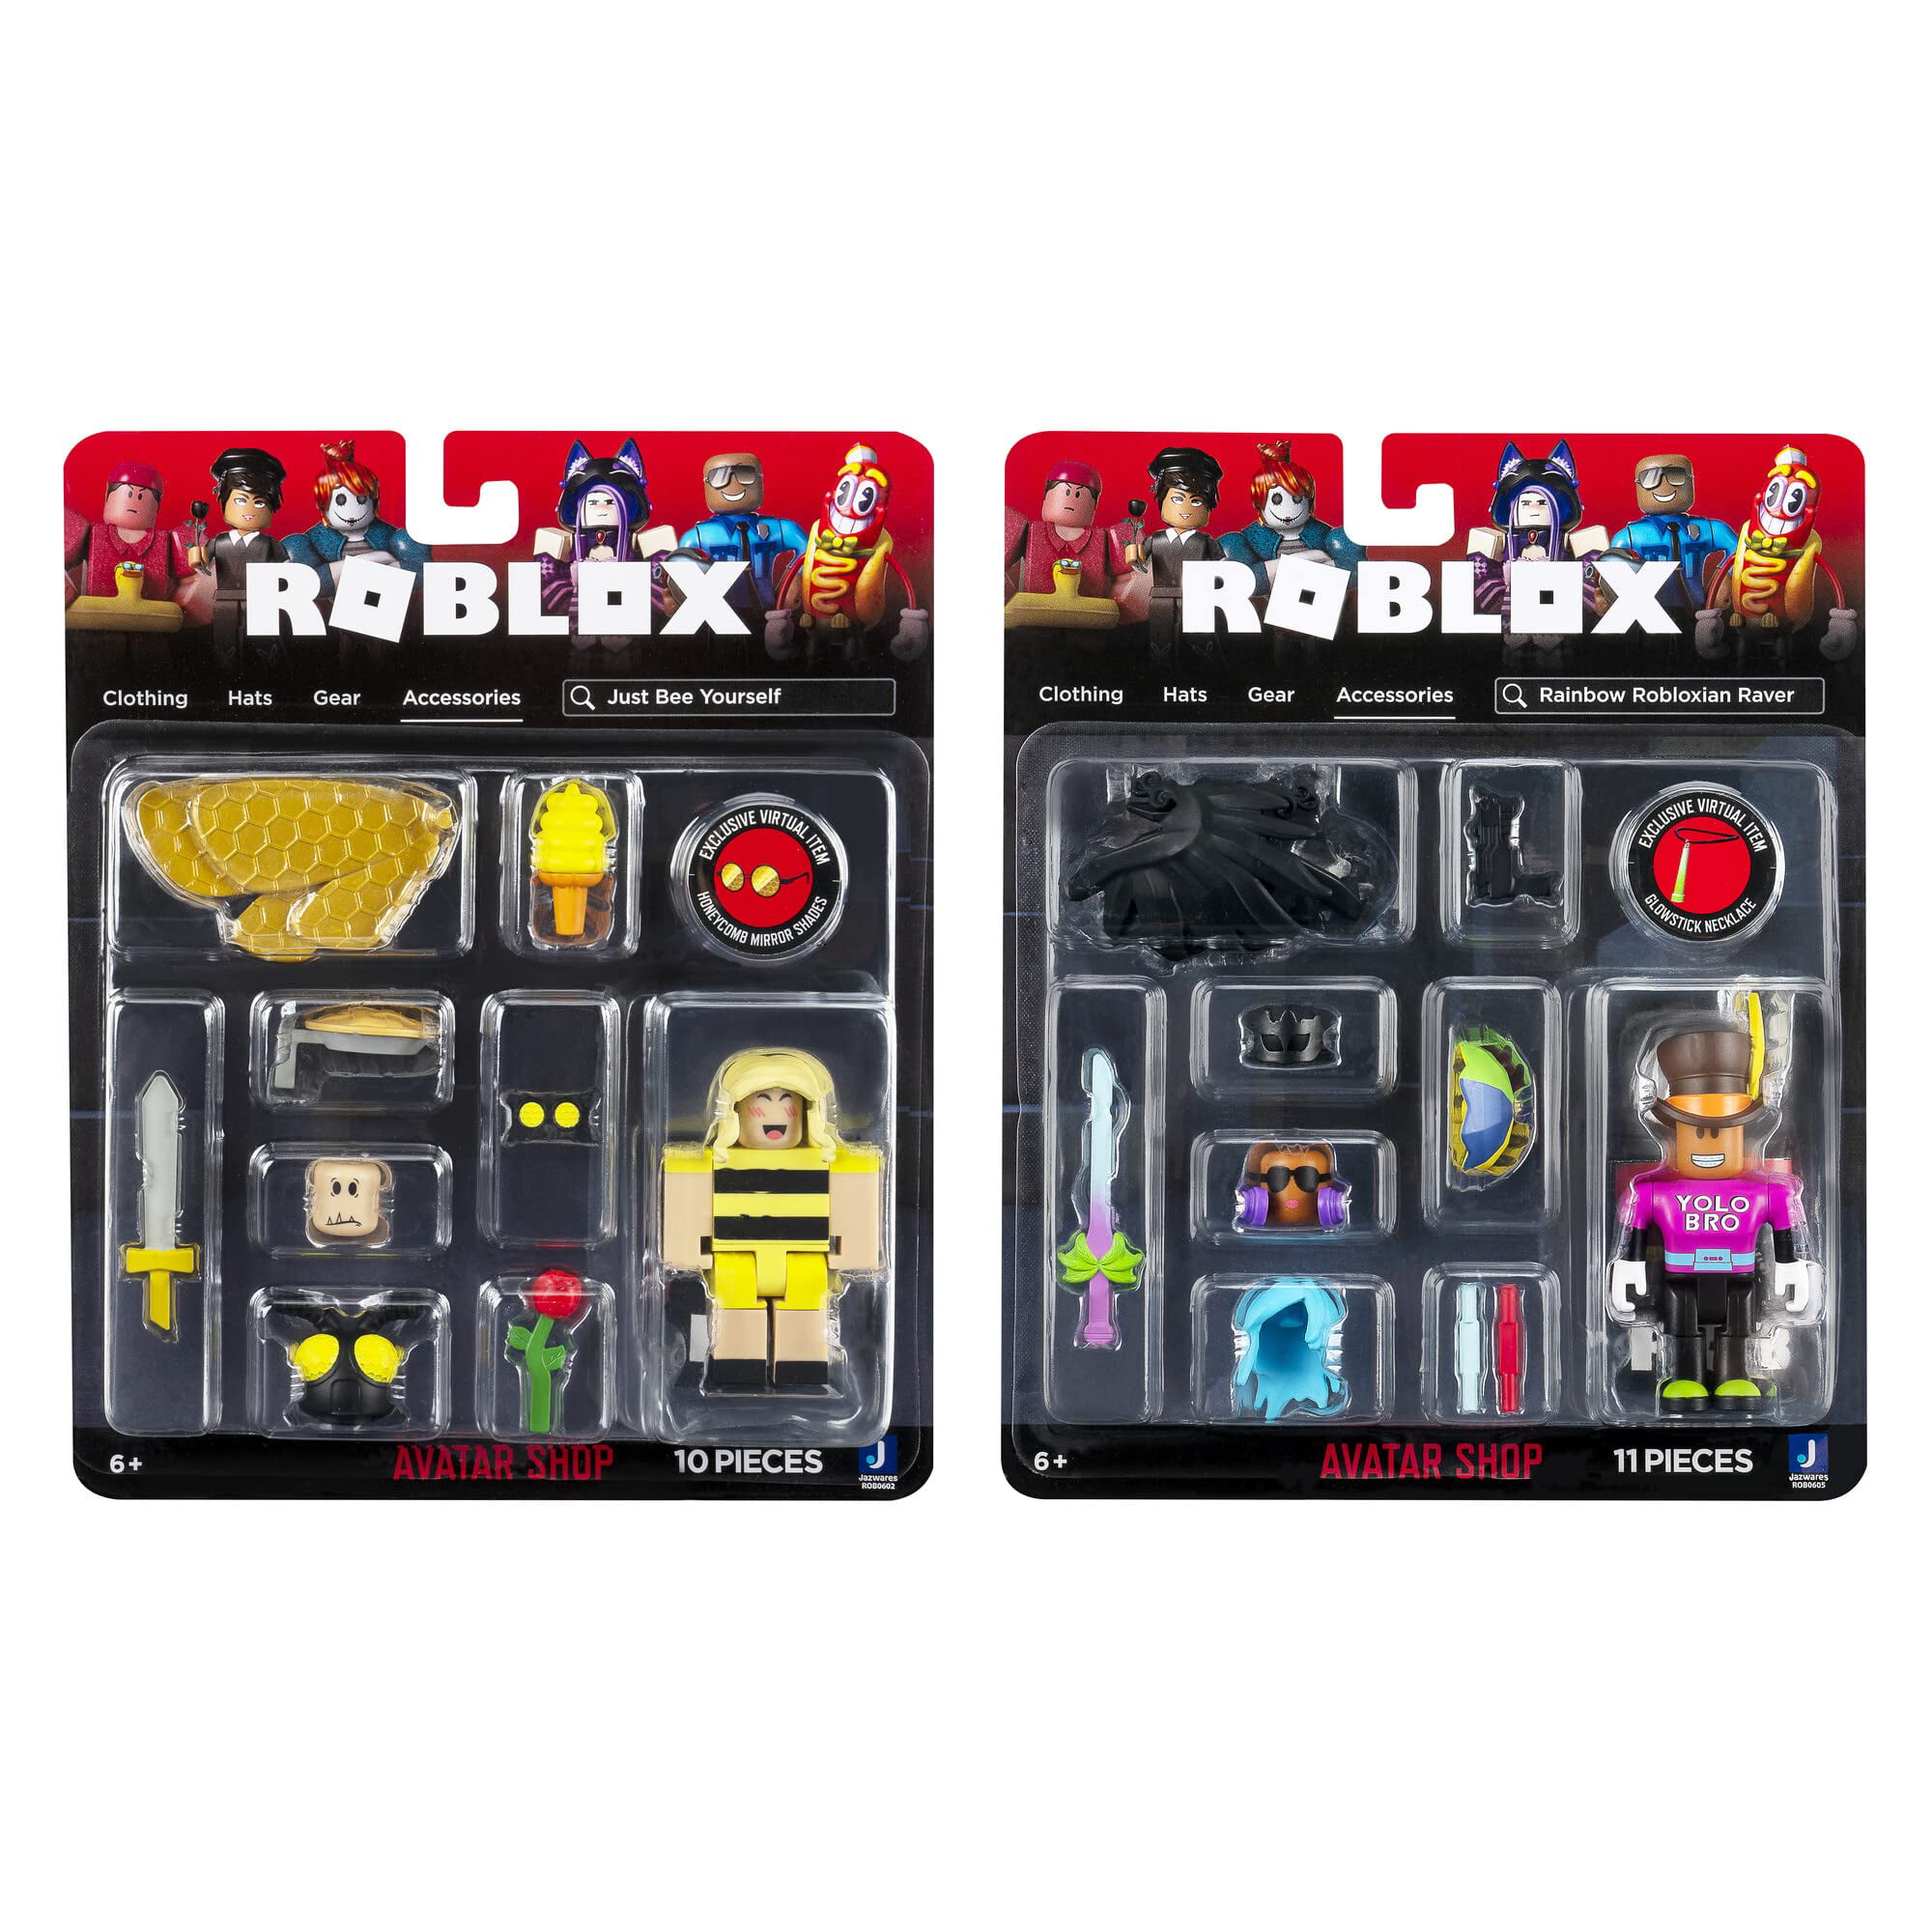 1,000+ affordable roblox For Sale, Gaming Accessories